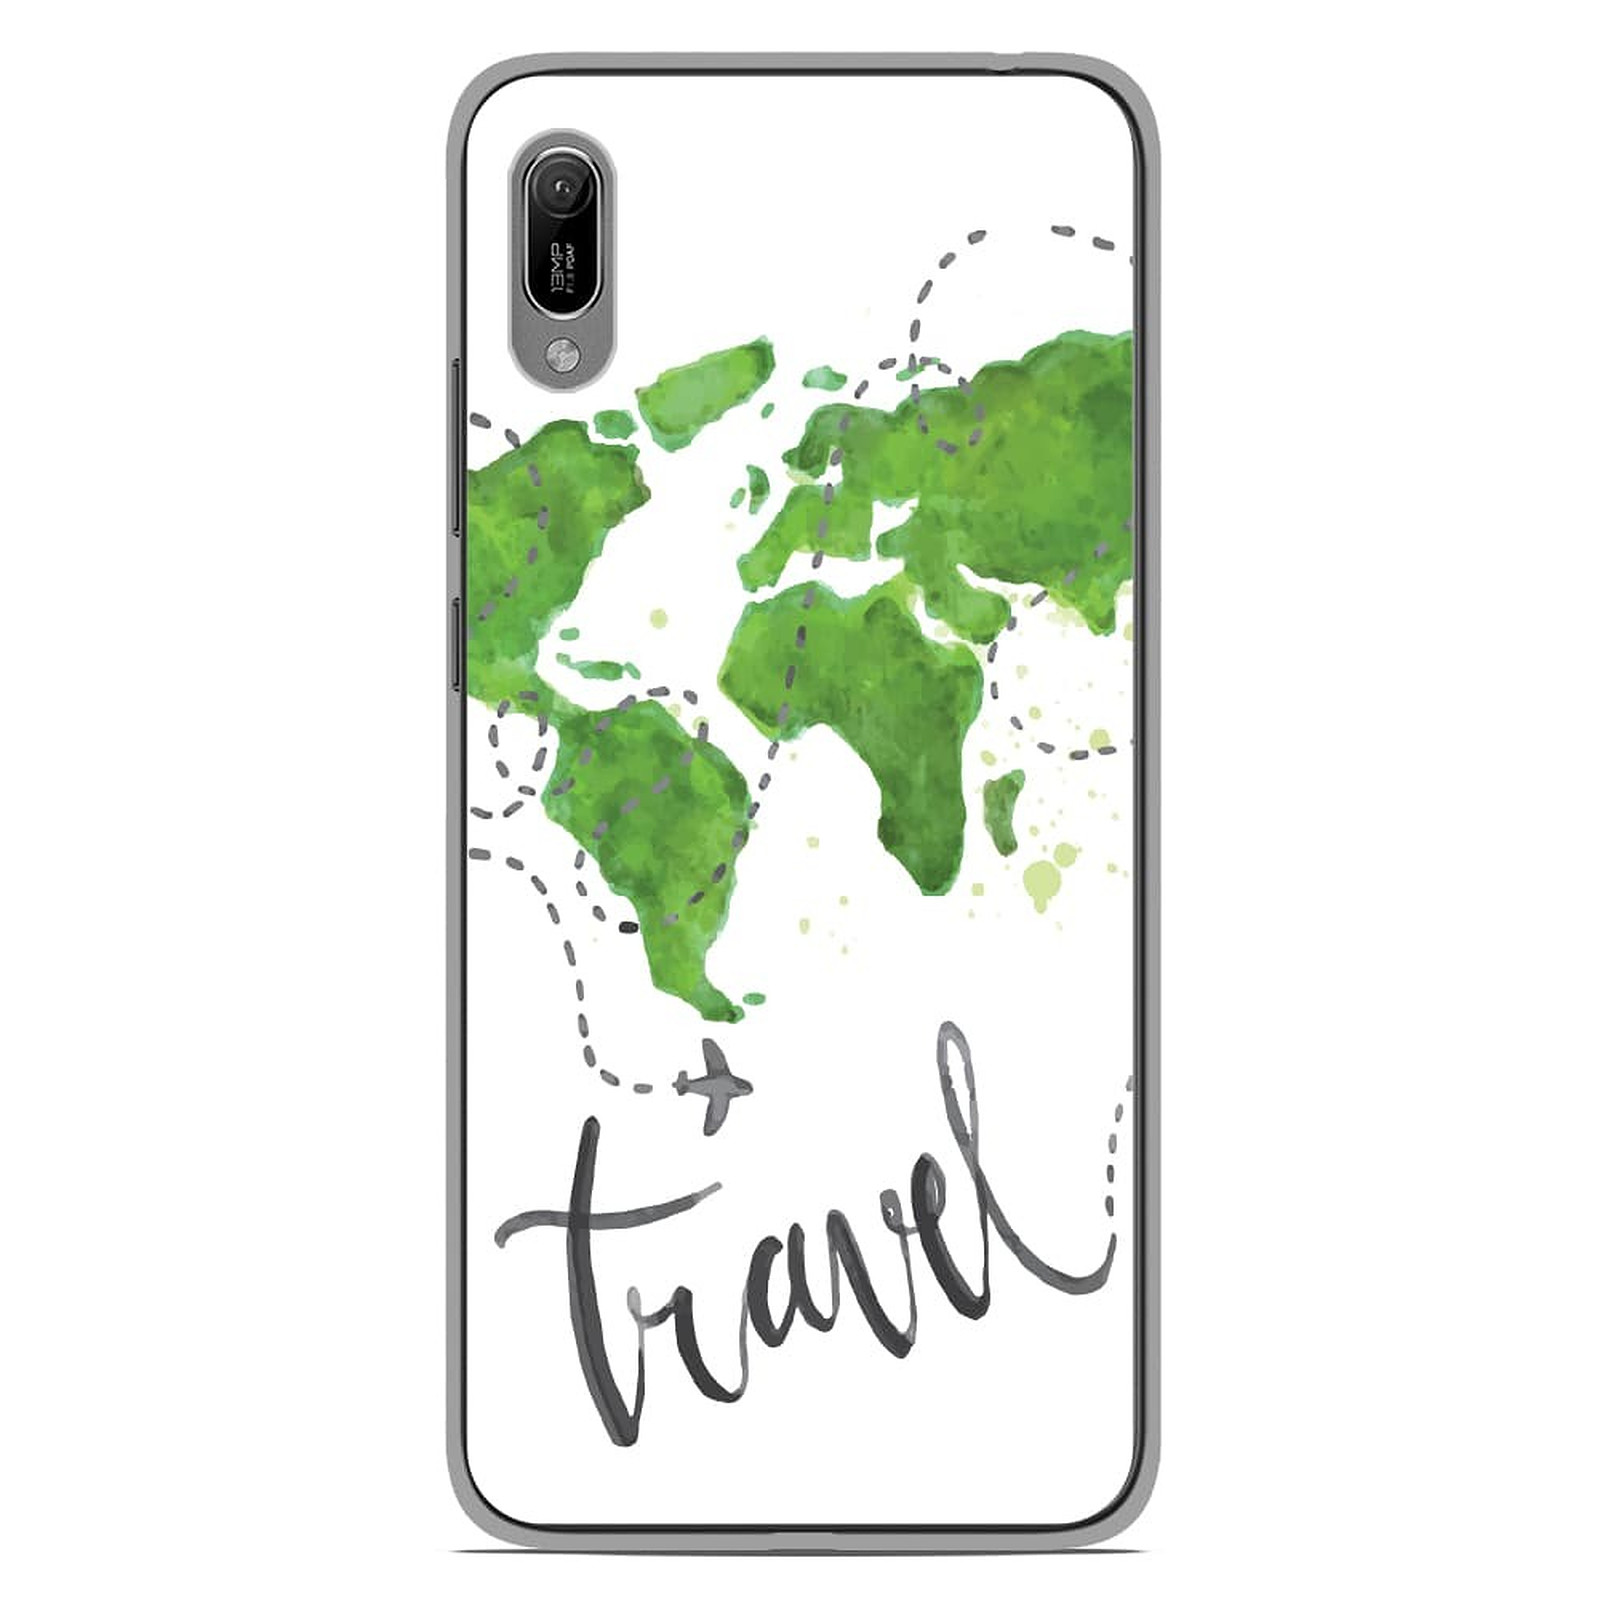 1001 Coques Coque silicone gel Huawei Y6 2019 motif Map Travel - Coque telephone 1001Coques